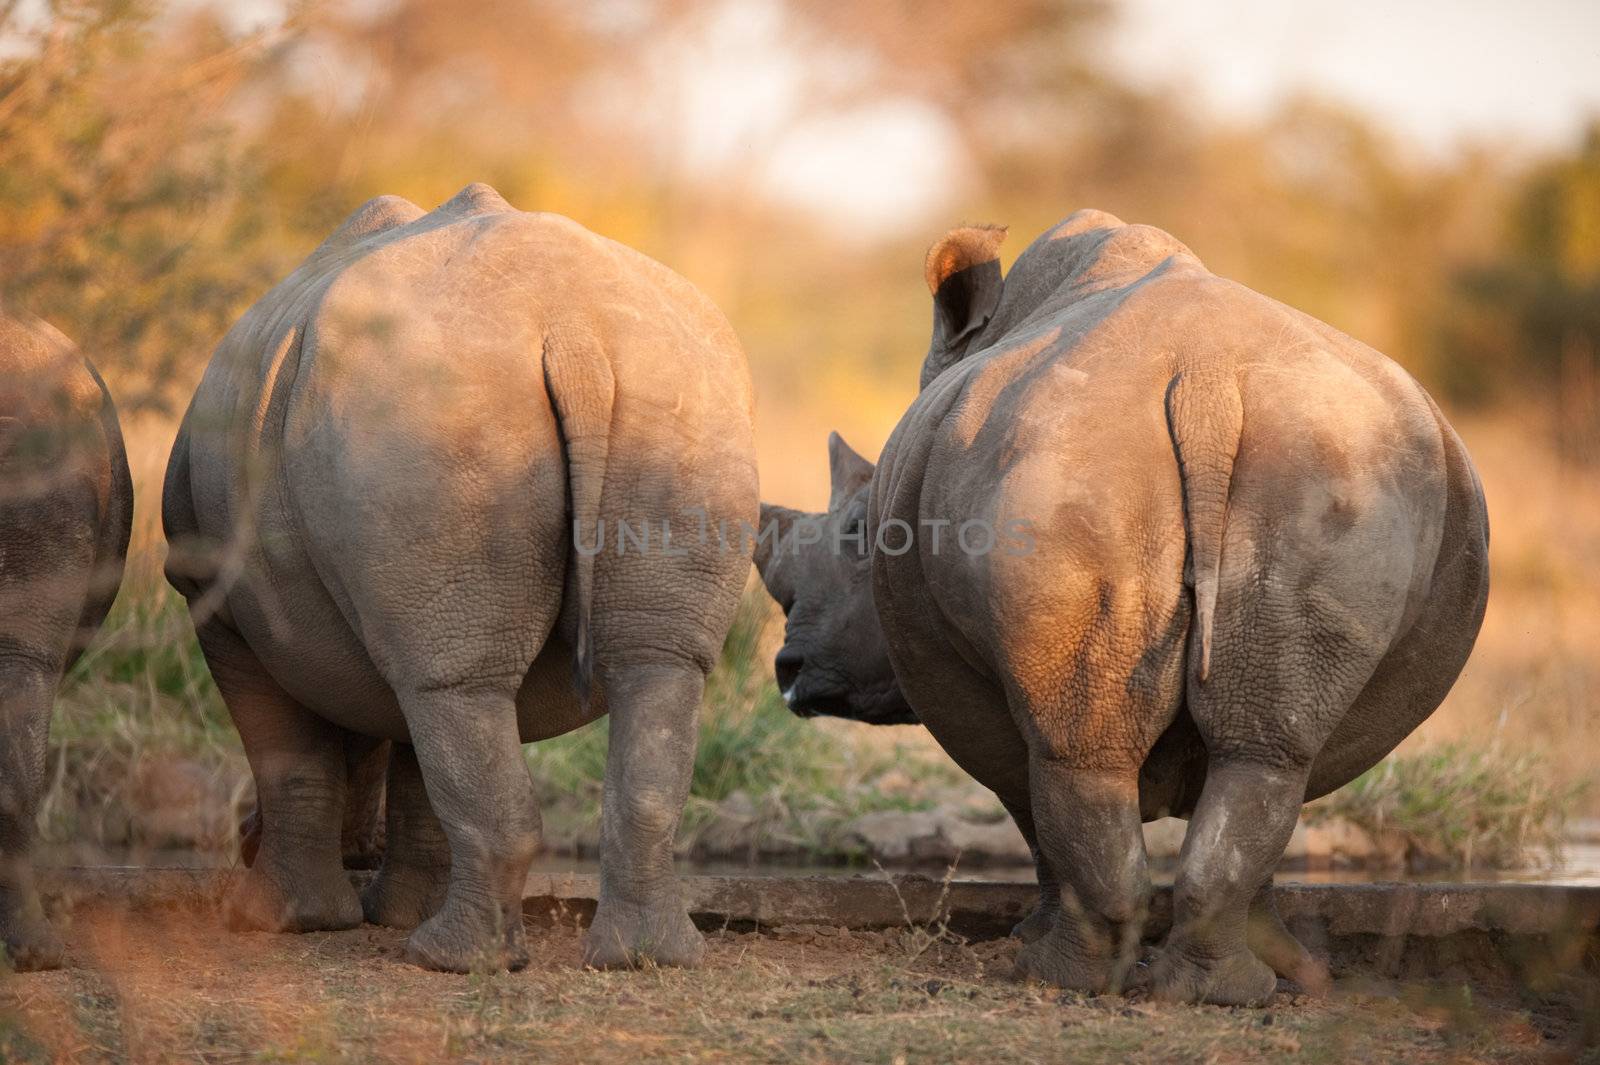 Rhinos seen from behind, near Kruger National Park